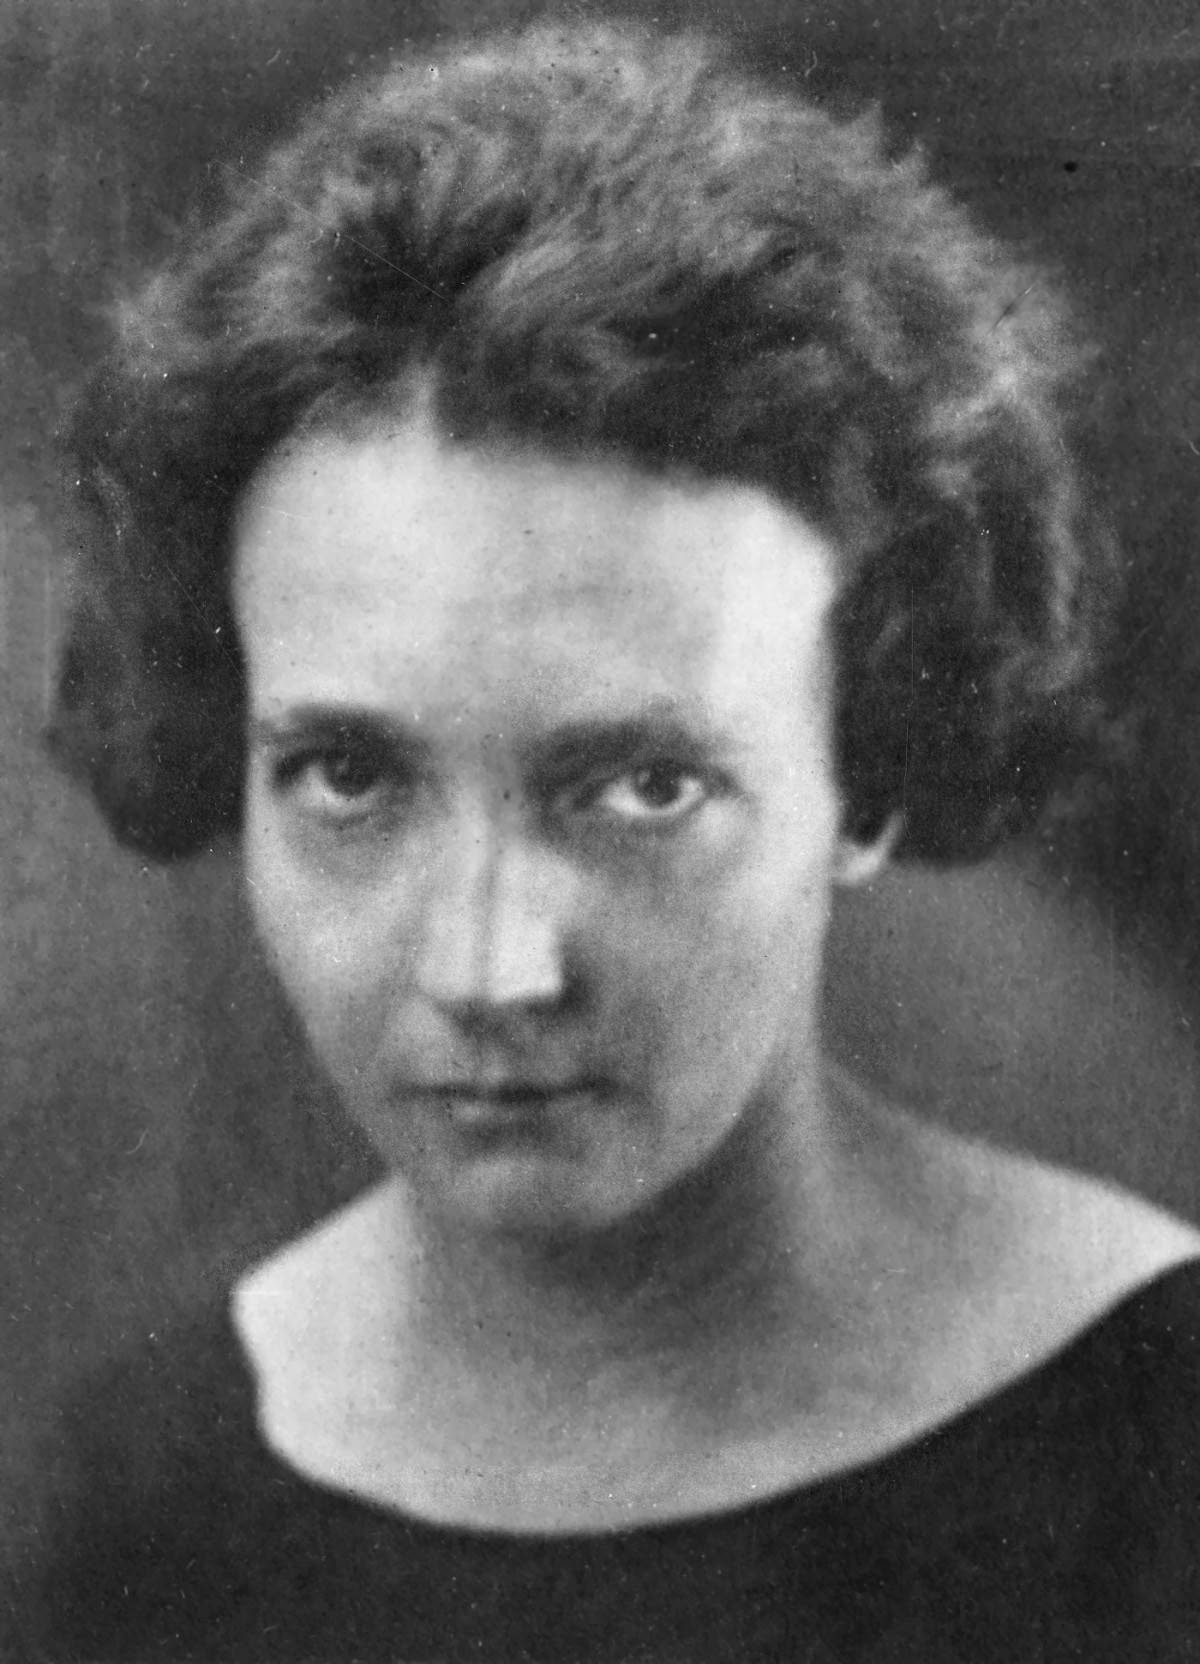 What were Irene Joliot-Curie's experiments?